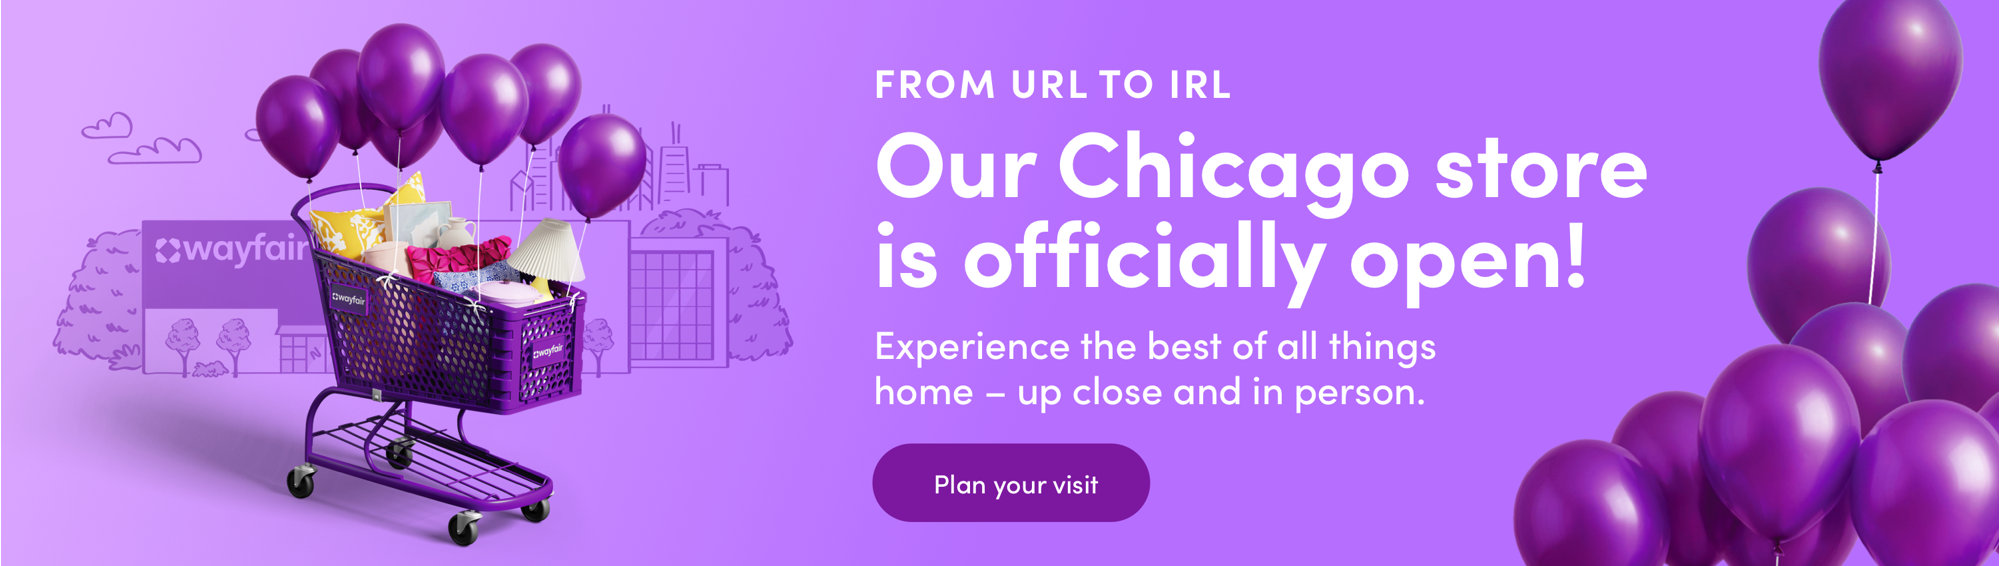 From URL to IRL. Our Chicago store is officially open! Experience the best of all things home - up close and in person. Plan your visit